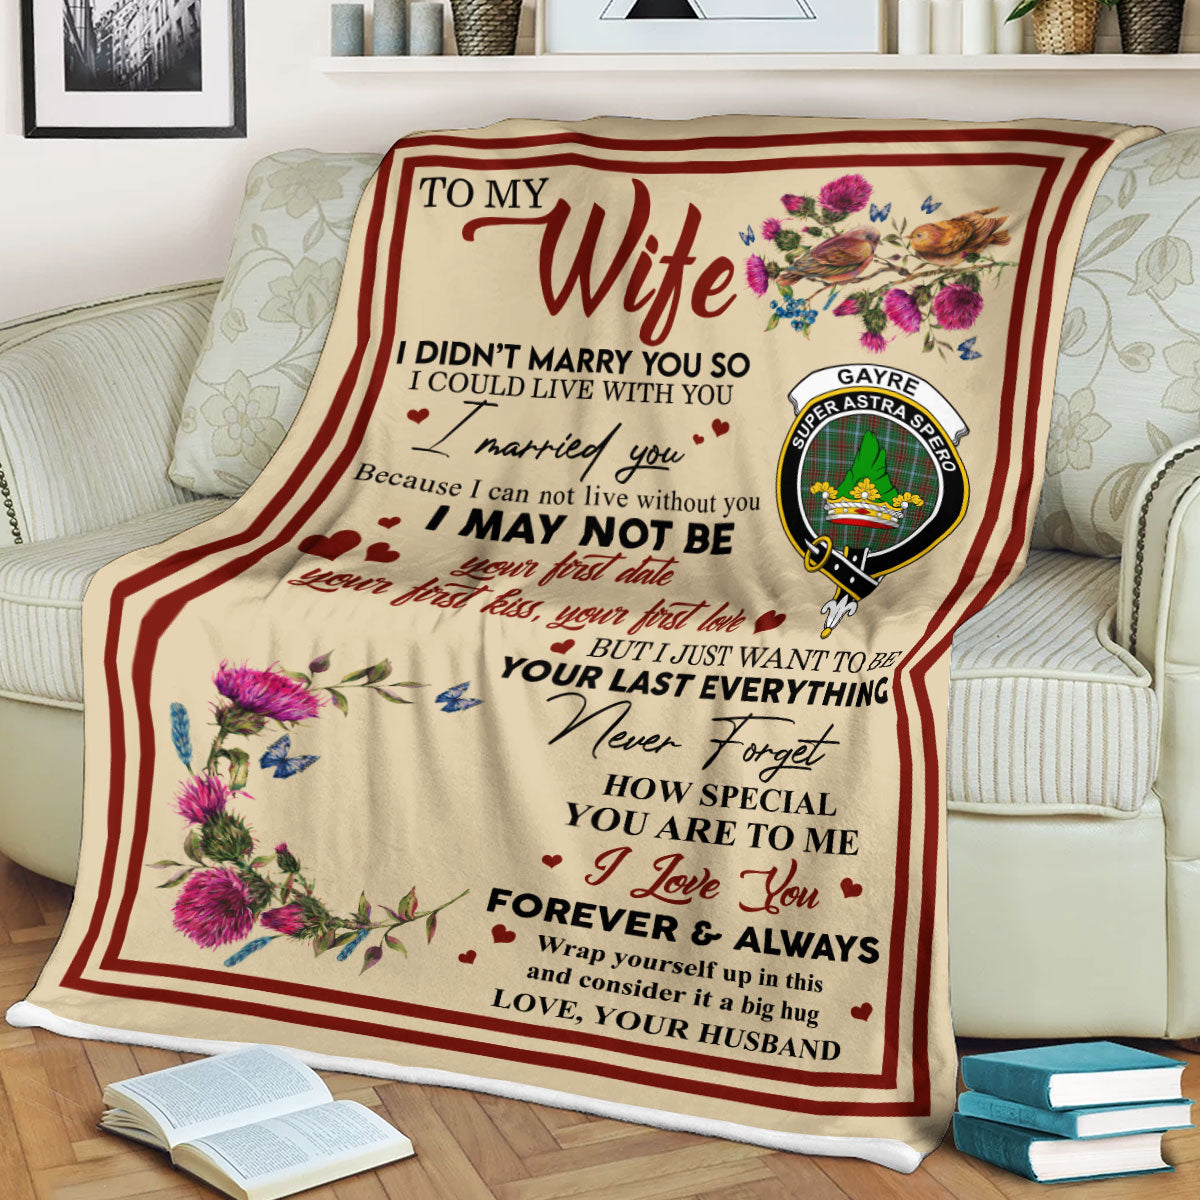 Scots Print Blanket - Gayre Tartan Crest Blanket To My Wife Style, Gift From Scottish Husband